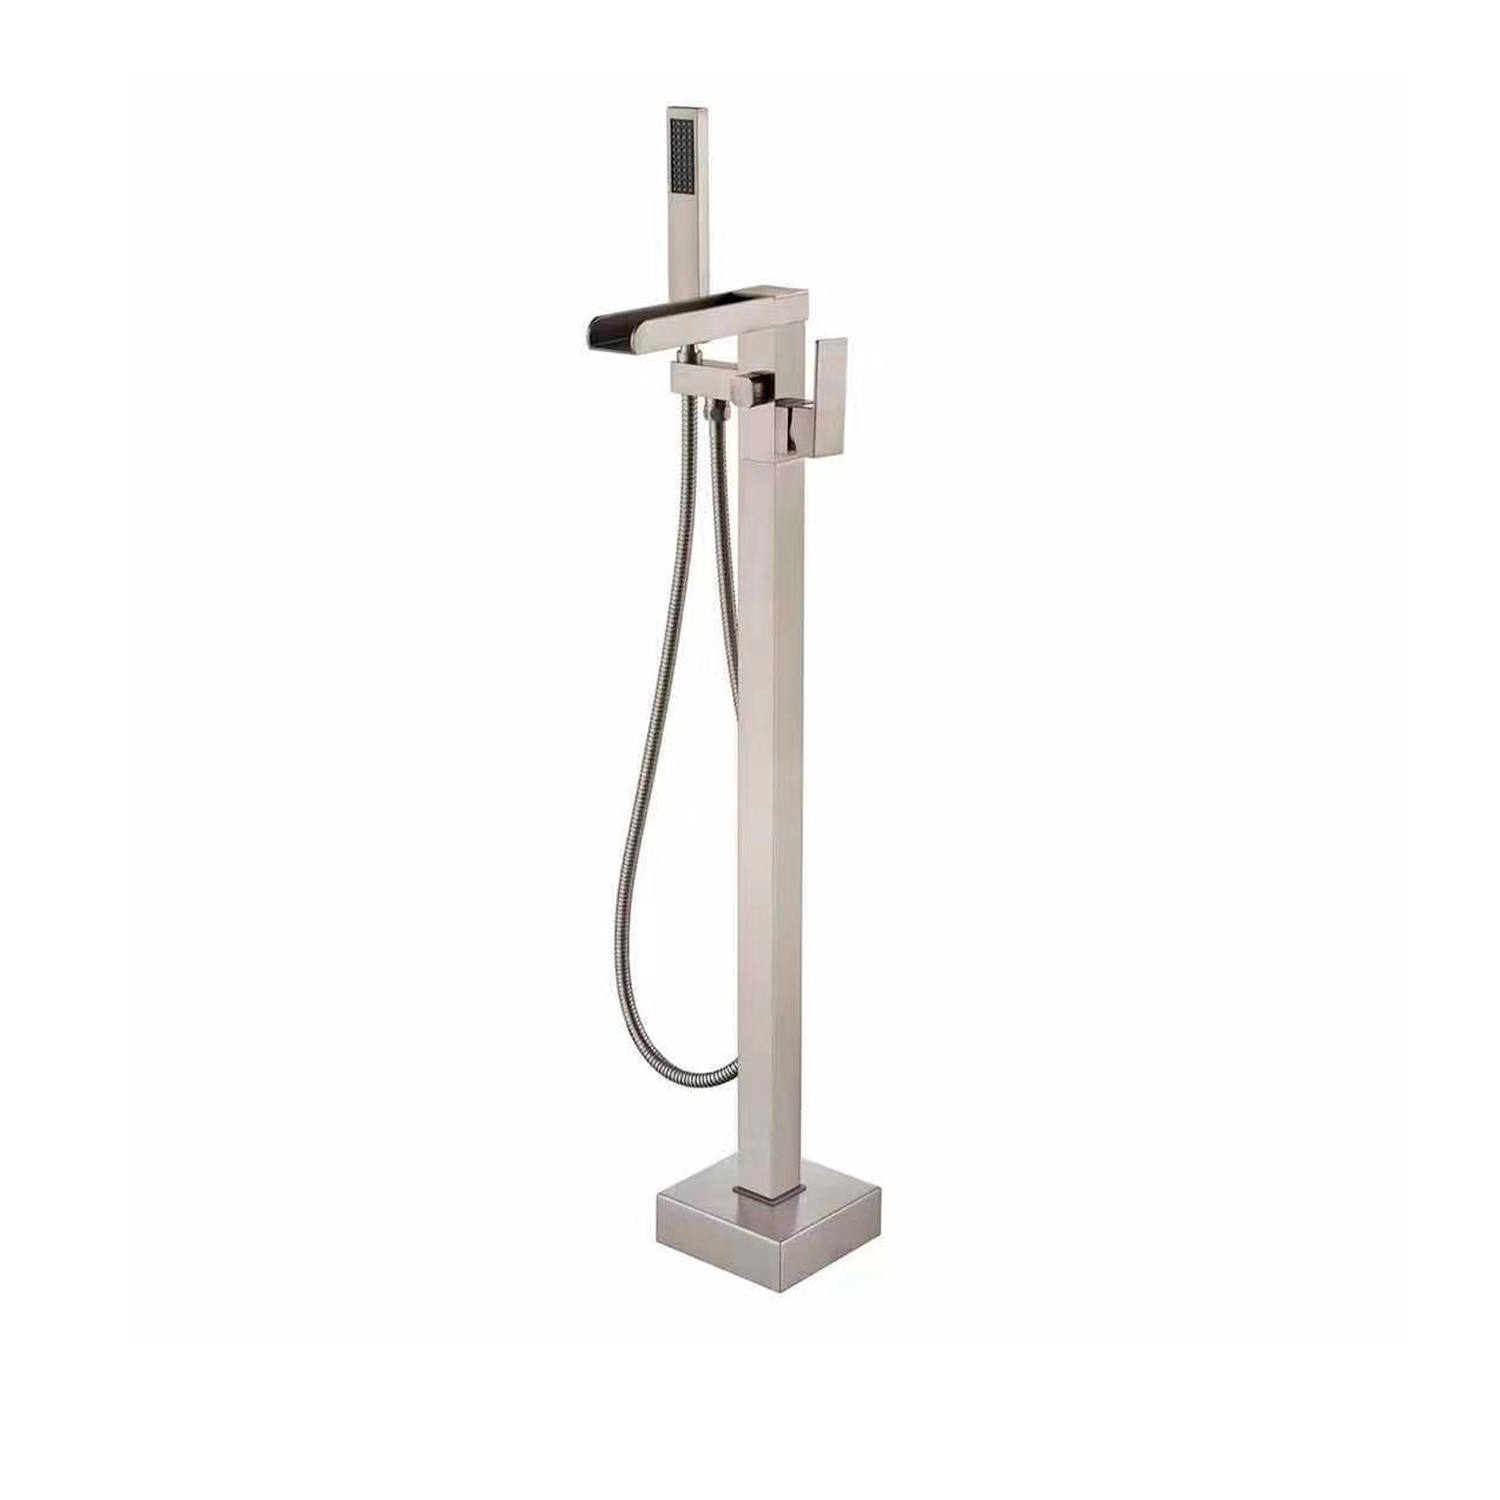 DAX Freestanding Tub Filler with Hand Shower and Waterfall Spout Brushed Nickel Finish (DAX-8853-BN)